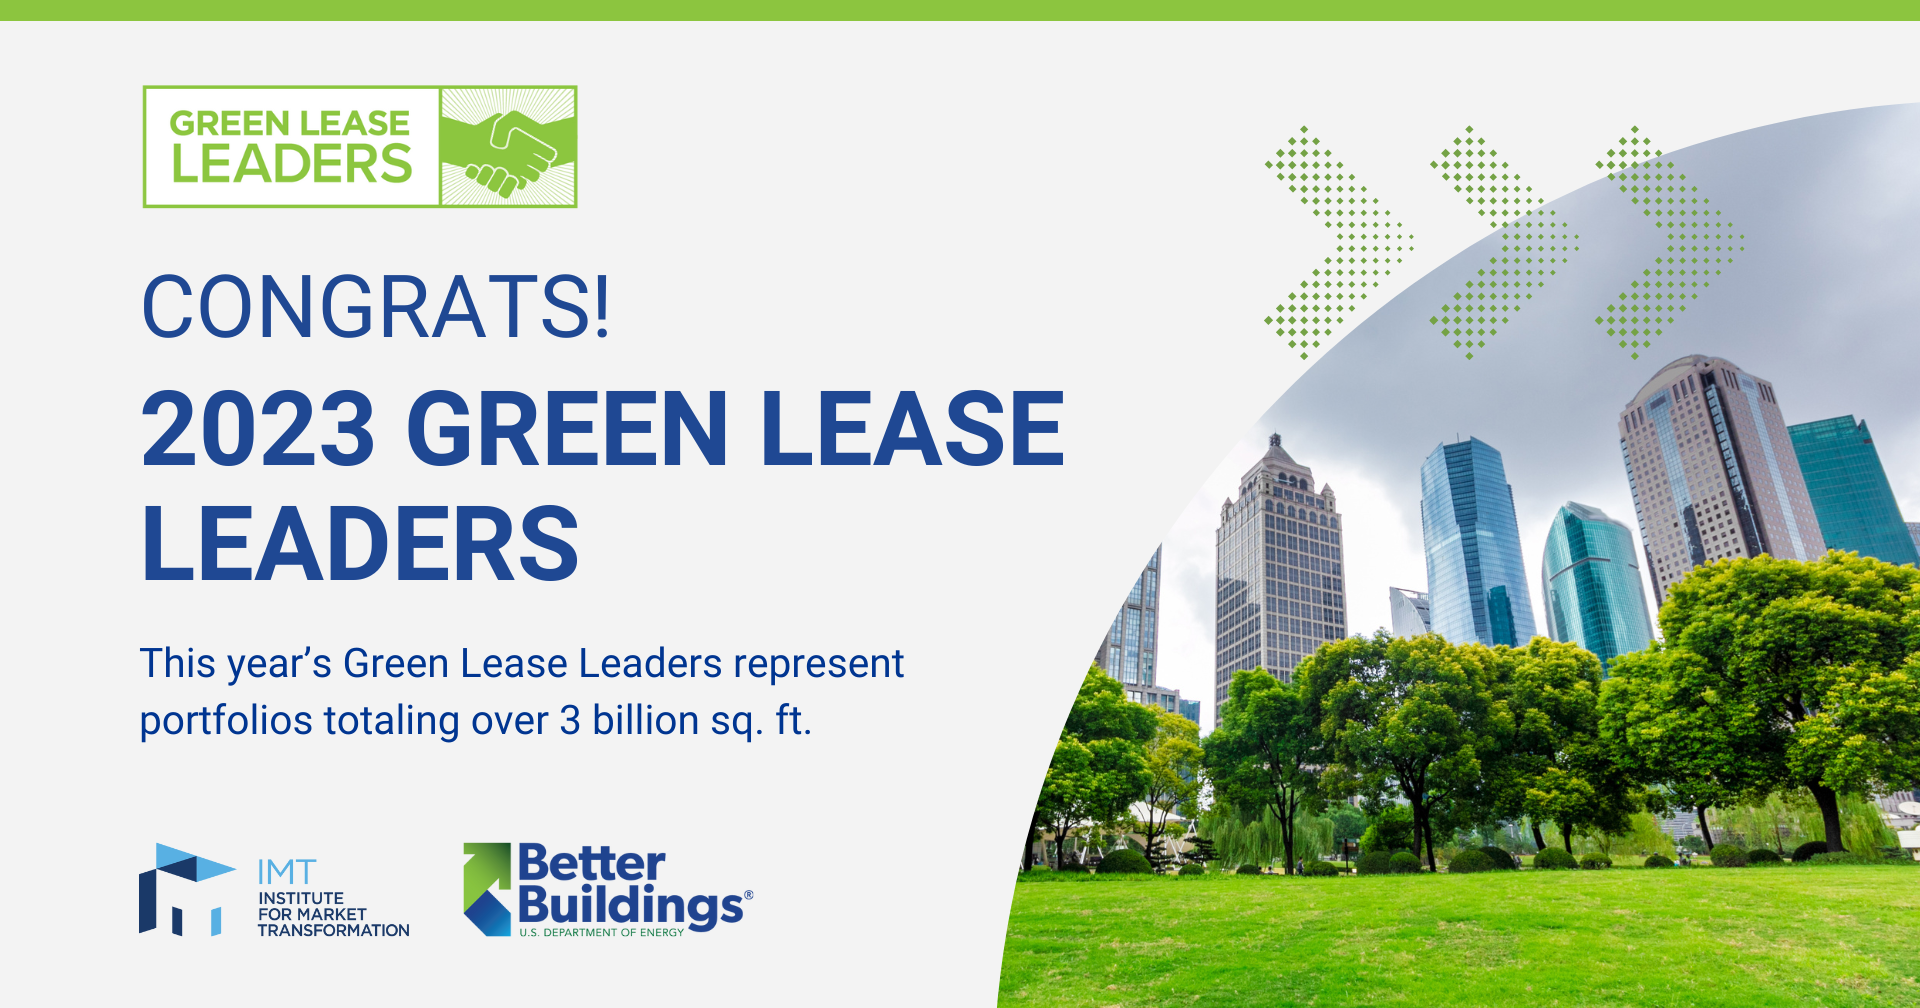 Congrats to the 2023 Green Lease Leaders